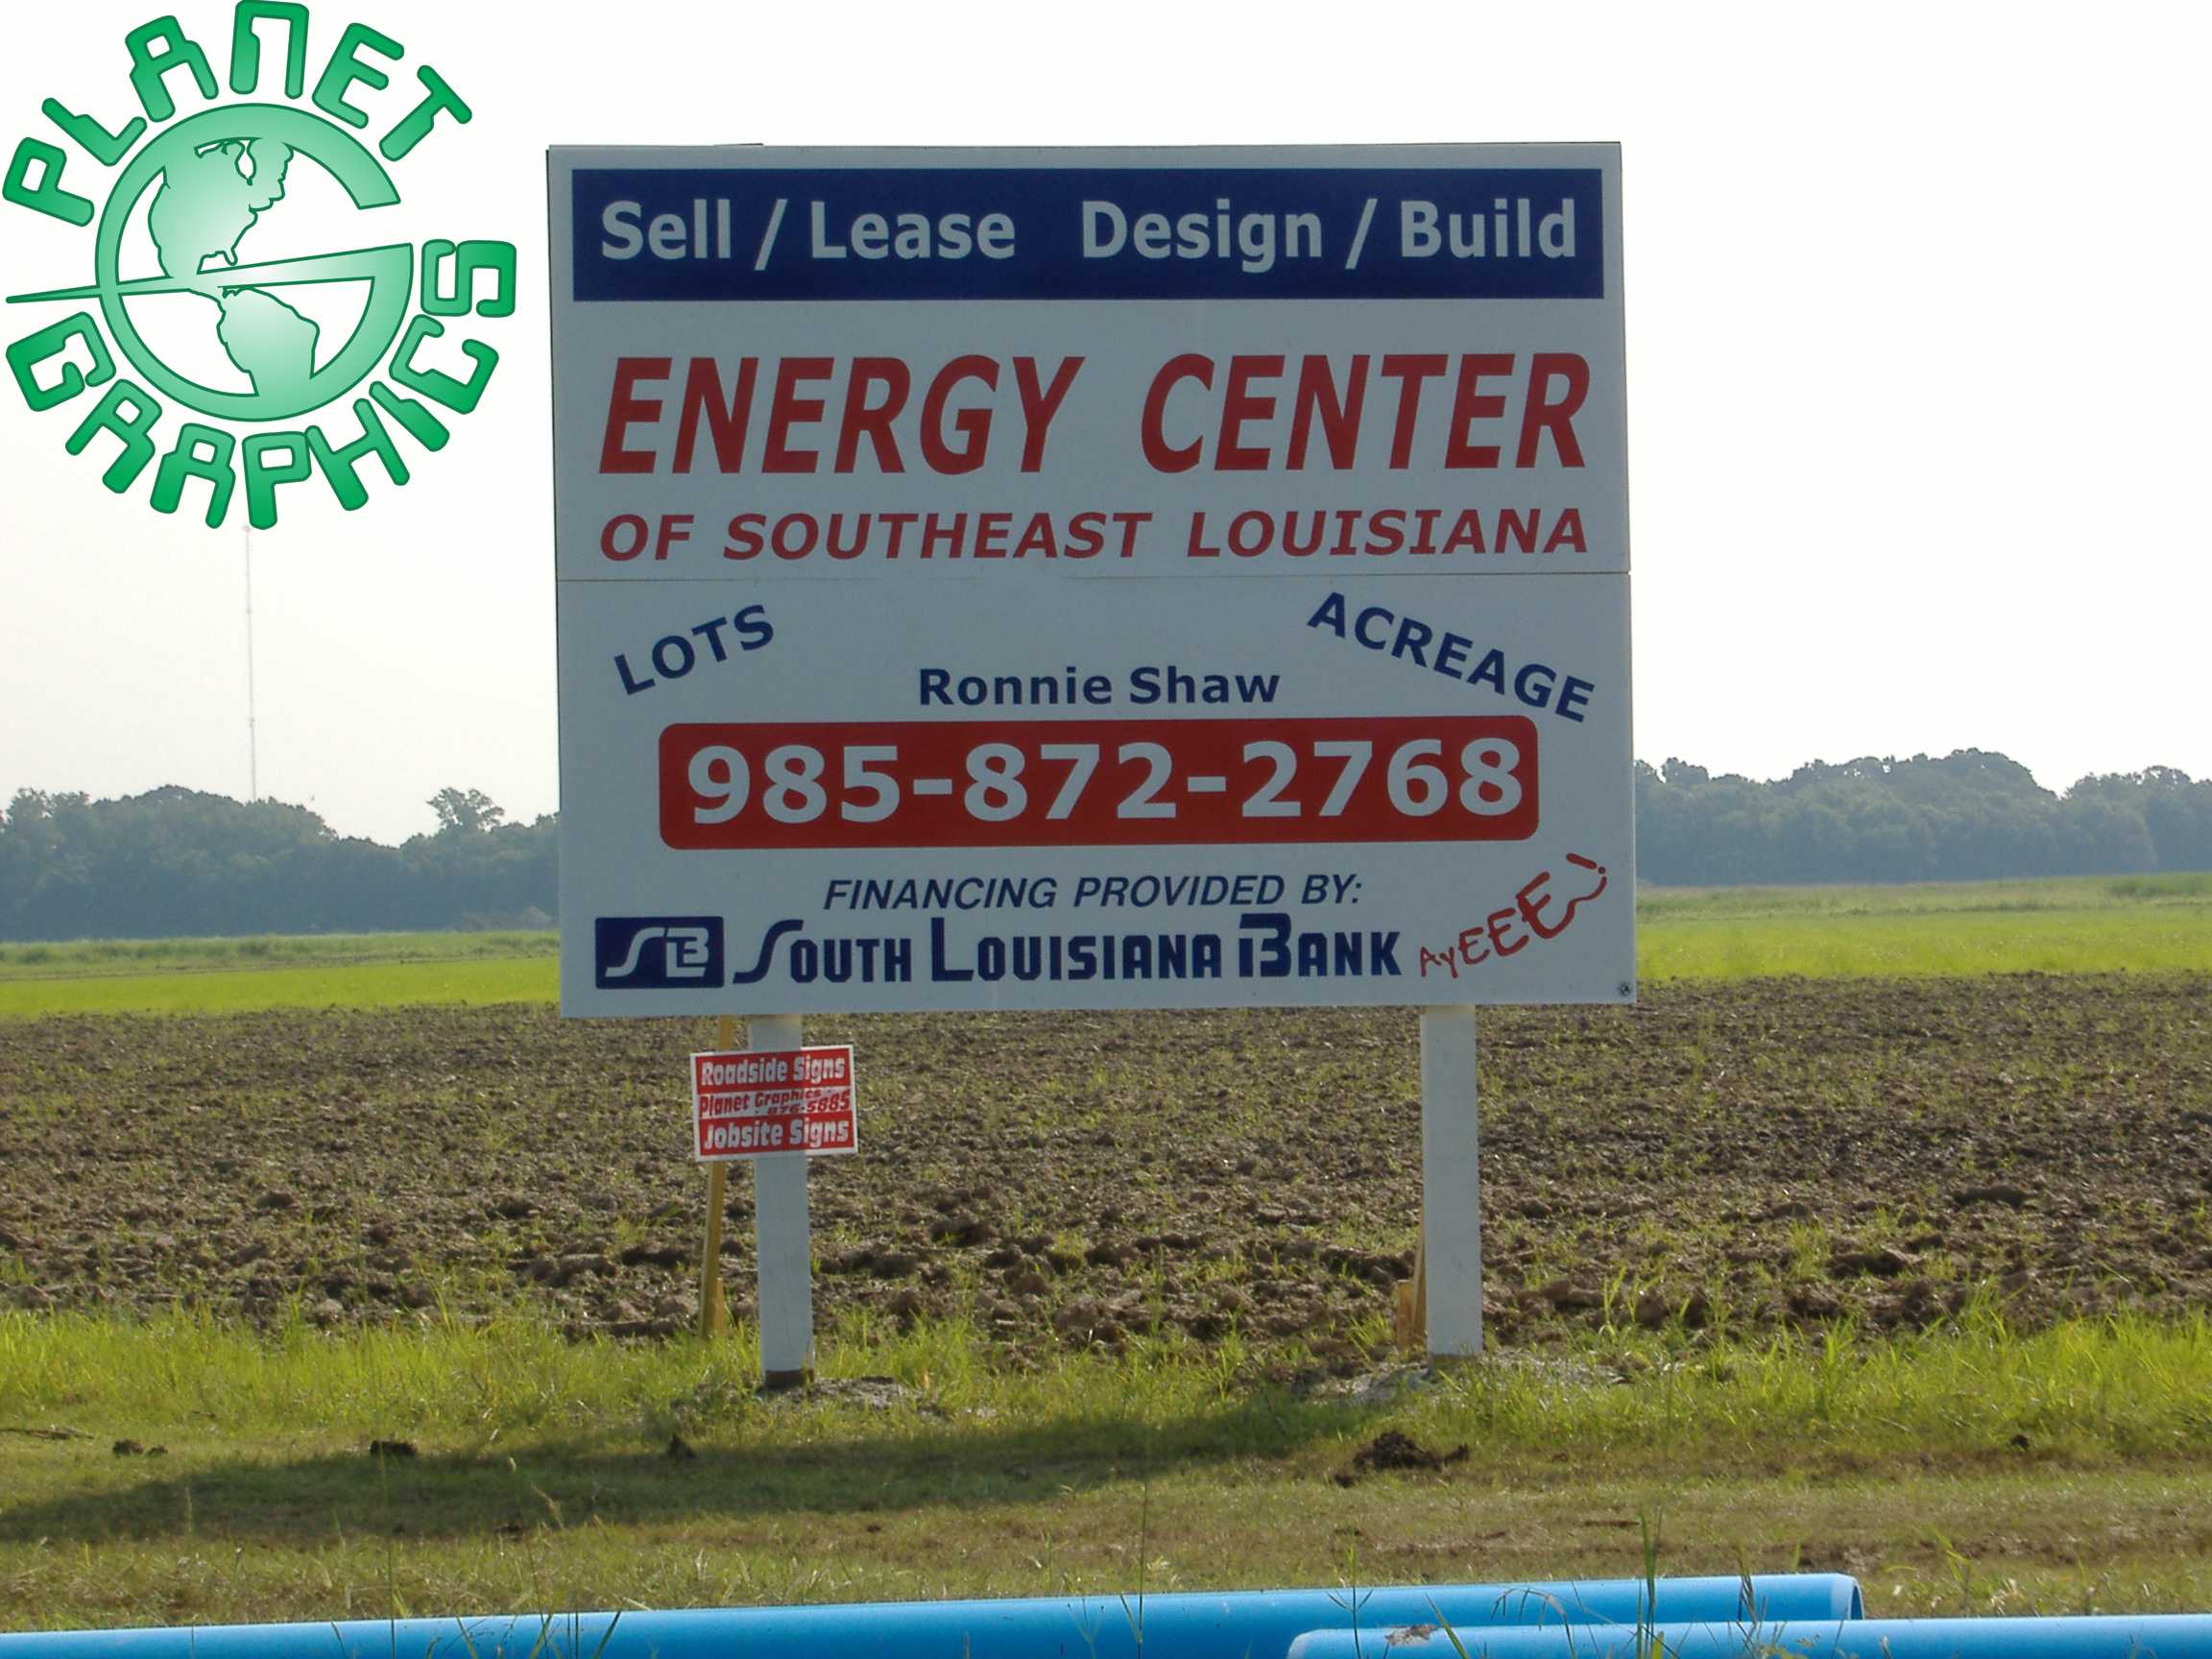 Real Estate / Yard / Site Sign, Energy Center, Gray, SLB, South Louisiana Bank, Planet Graphics